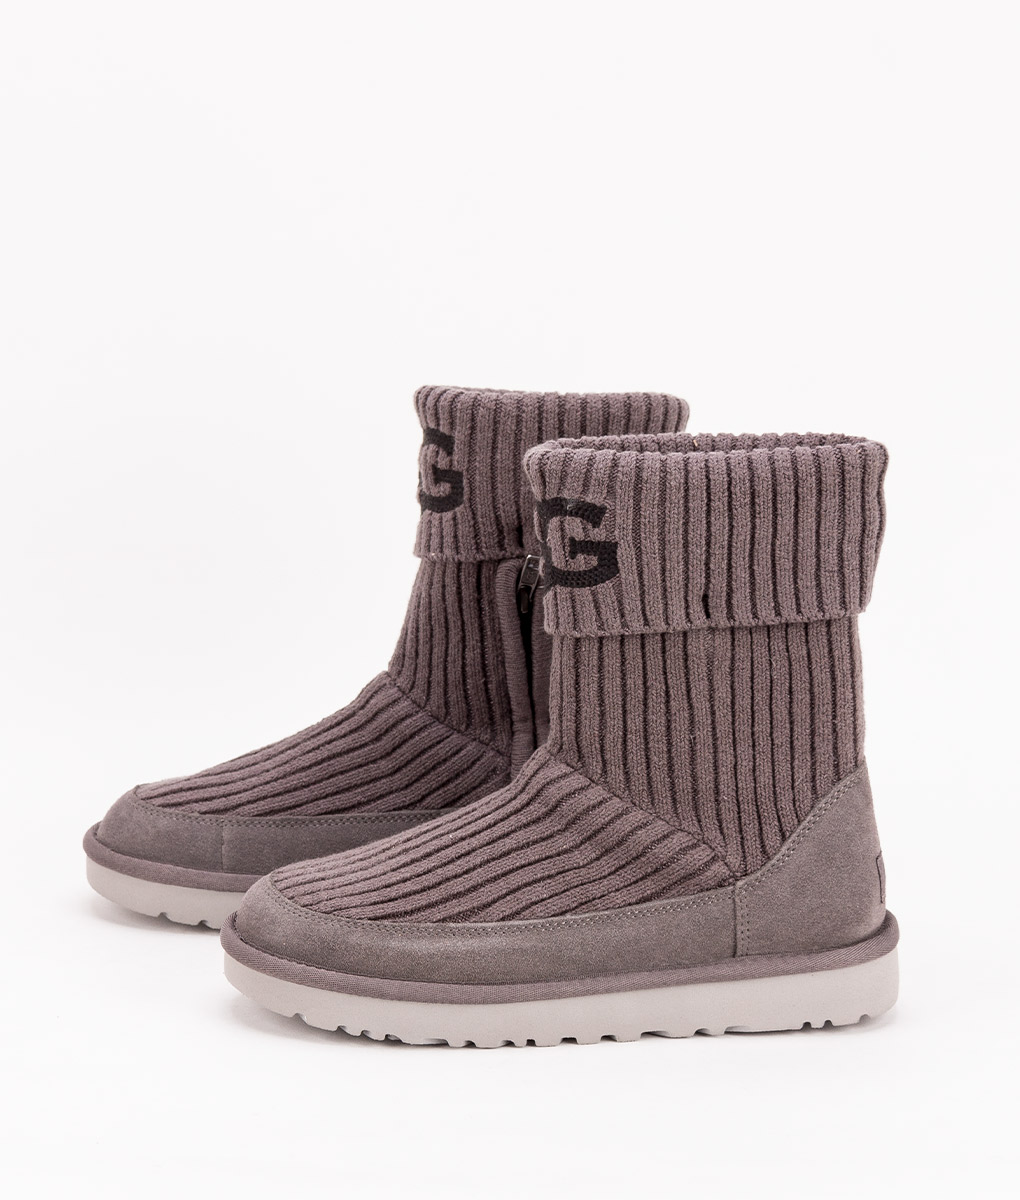 womens ugg knit boots